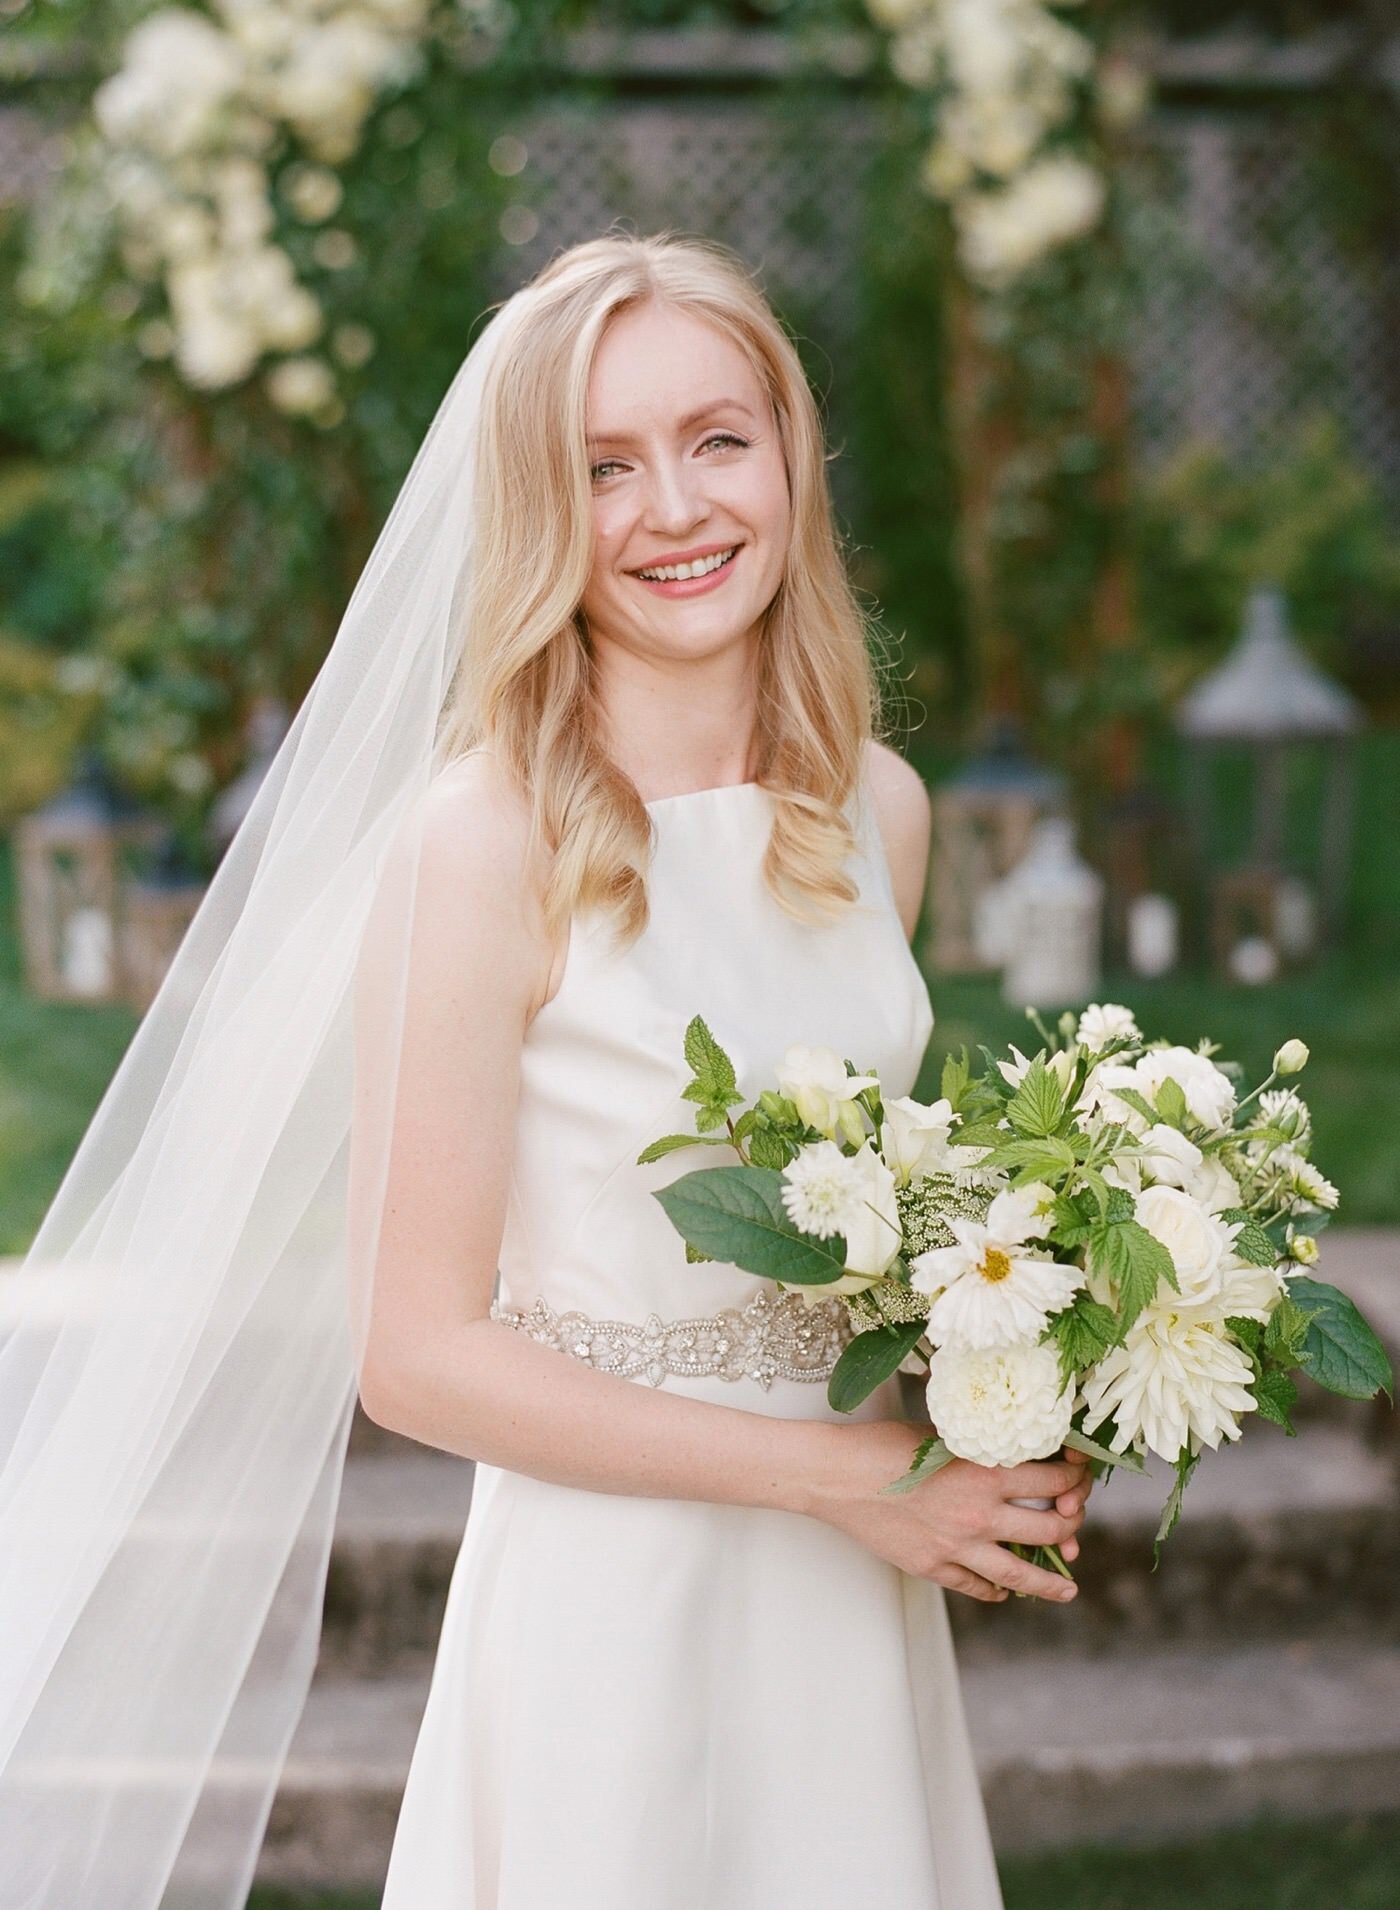 A classic bride with a white and green bridal bouquet from Seattle Wedding Florist Gather Design Company